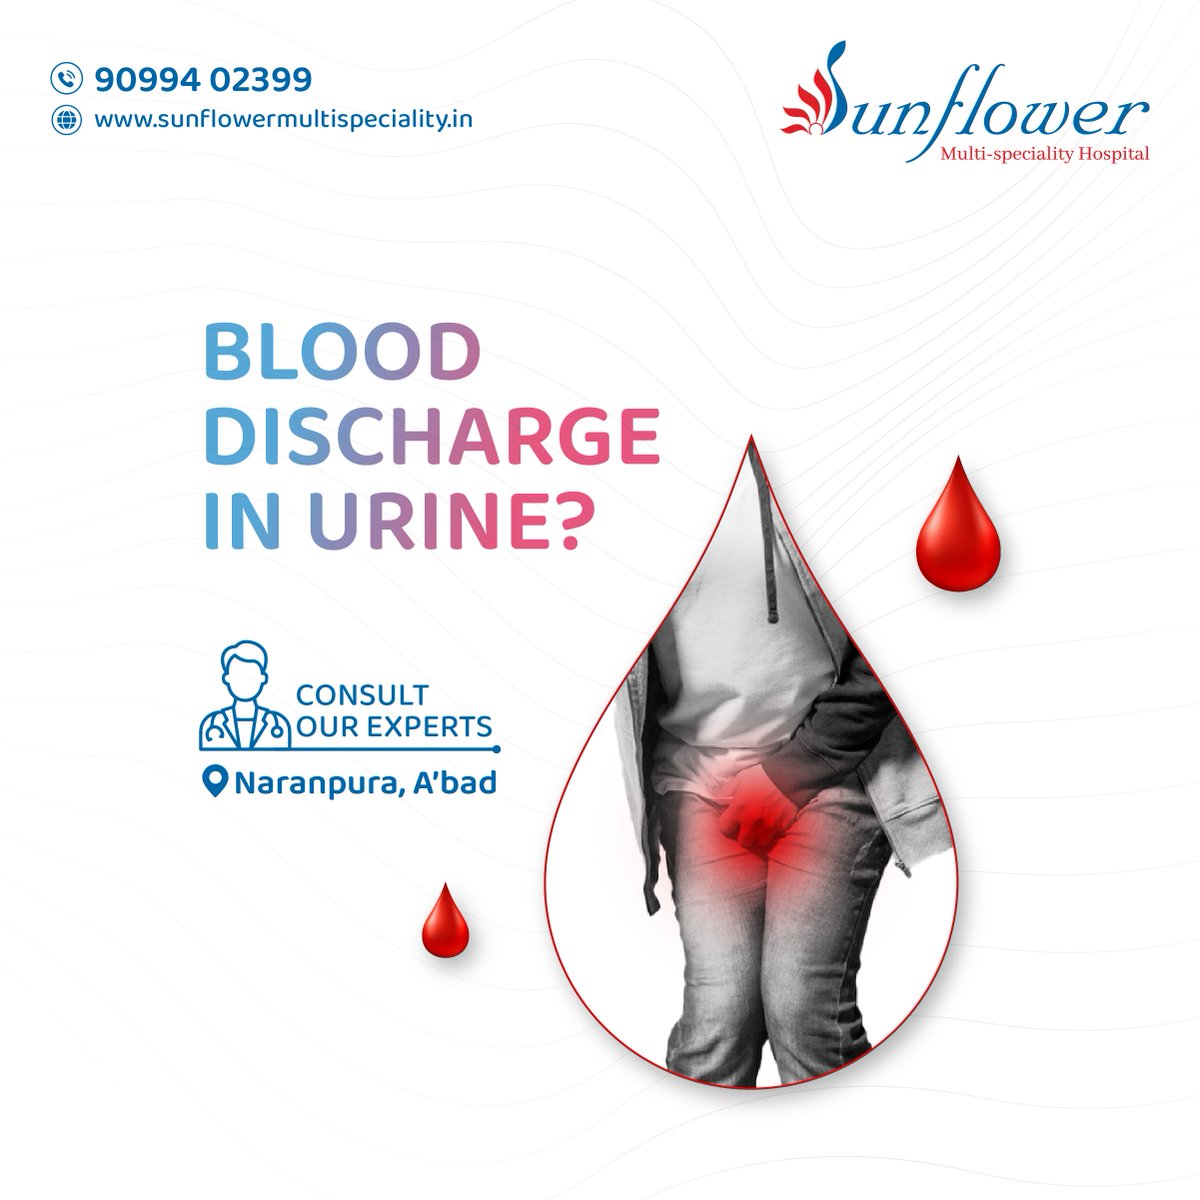 Shocked by the sight of blood in your urine?
Worried about what it might mean? Don't wait, take action!

Consult our experts:
Call: +91 90994 02399
Visit: sunflowermultispeciality.in

#SunflowerMultispecialityHospital #Urologist #Urinaryissues #kidneyinfection #Naranpura #Ahmedabad